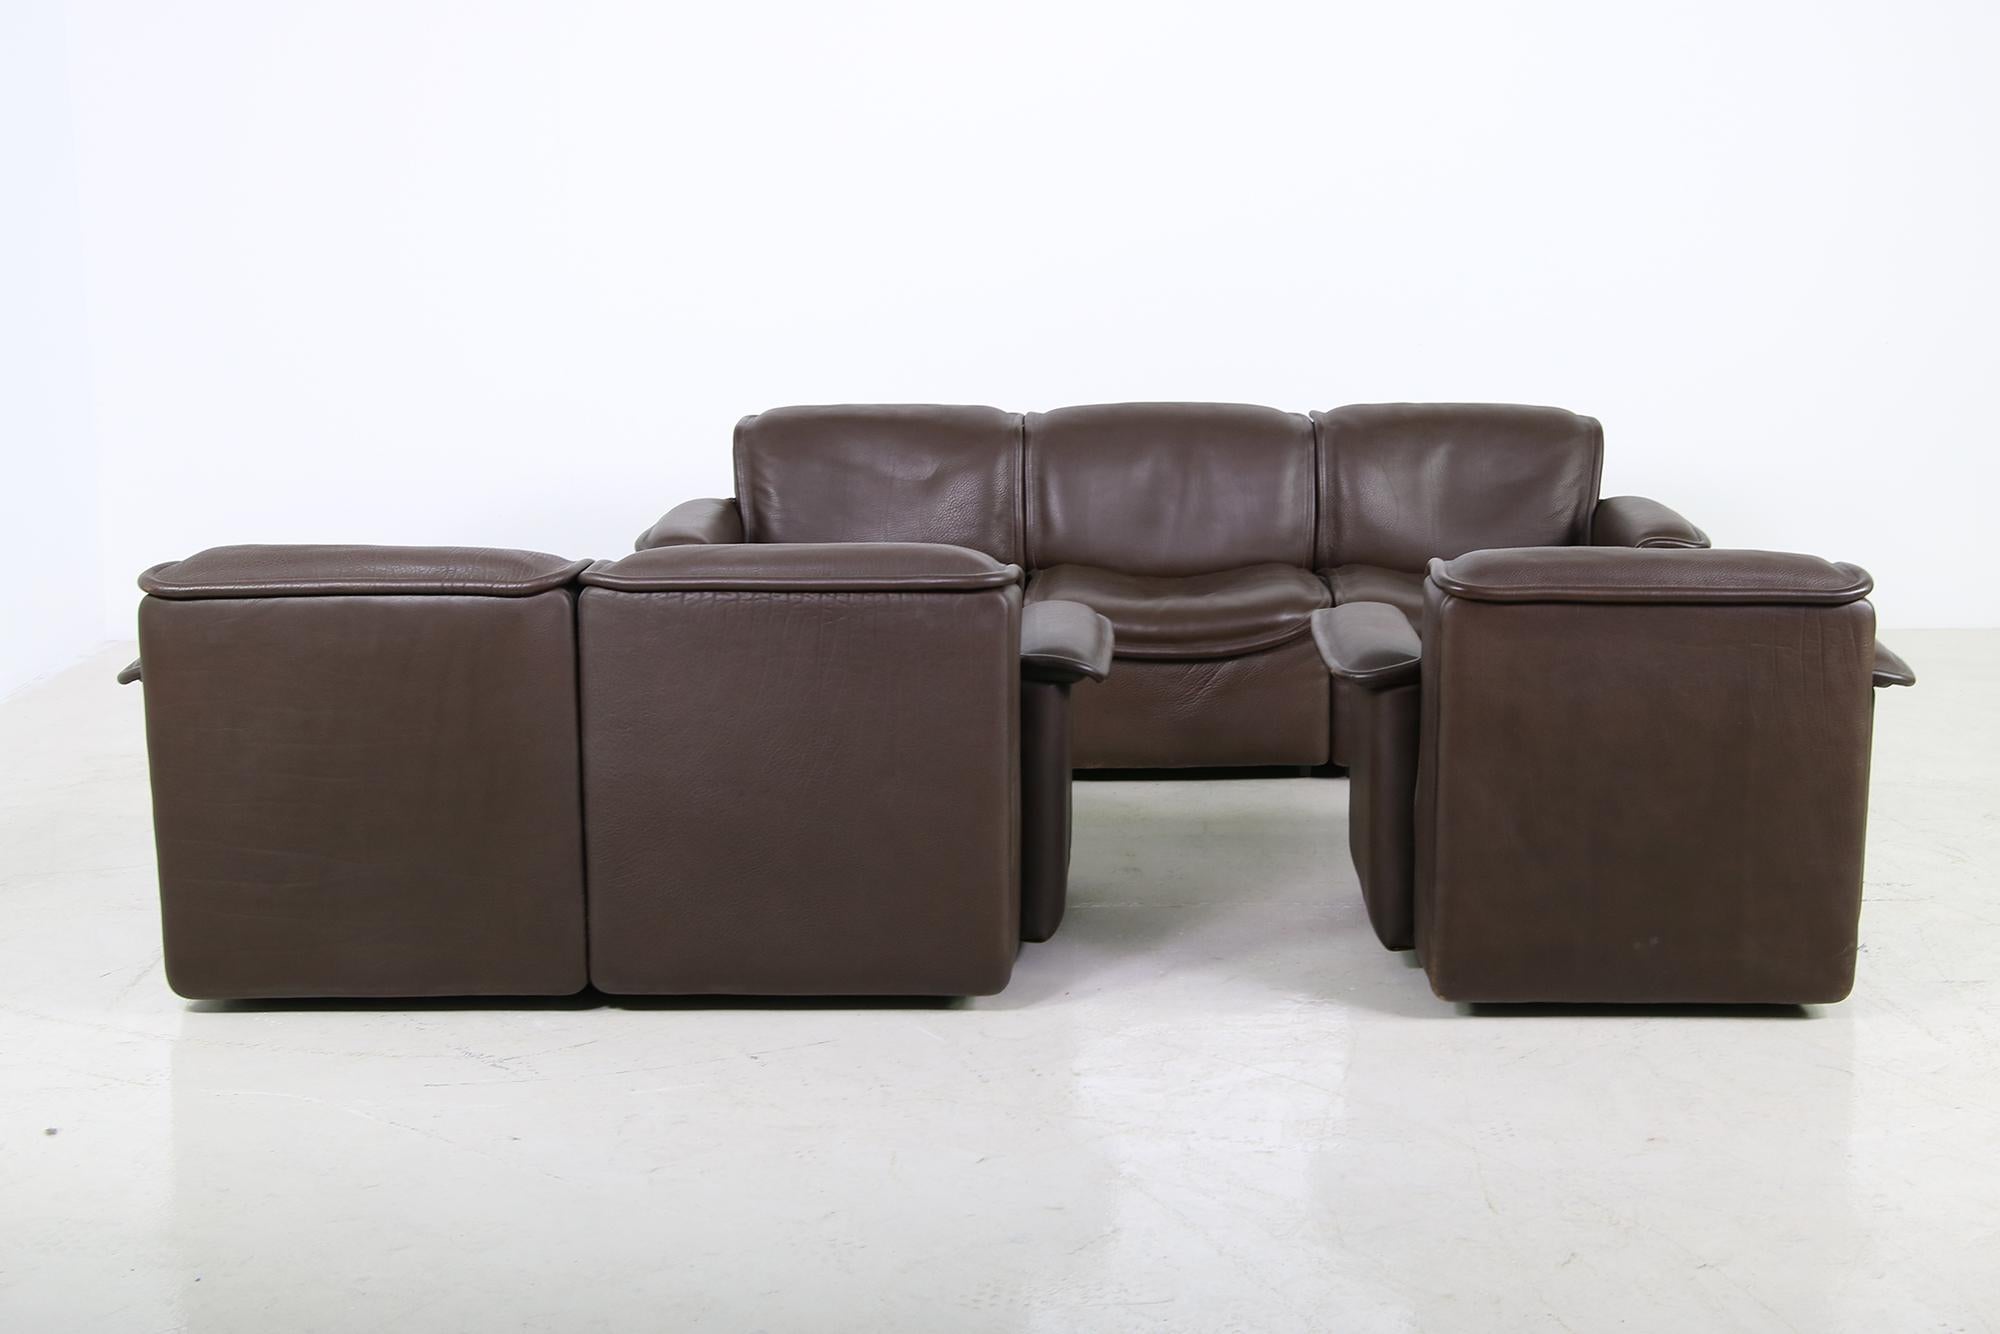 Late 20th Century Vintage 1970s Modular De Sede DS 12 Brown Leather Sofa Set & Chair Seating Group